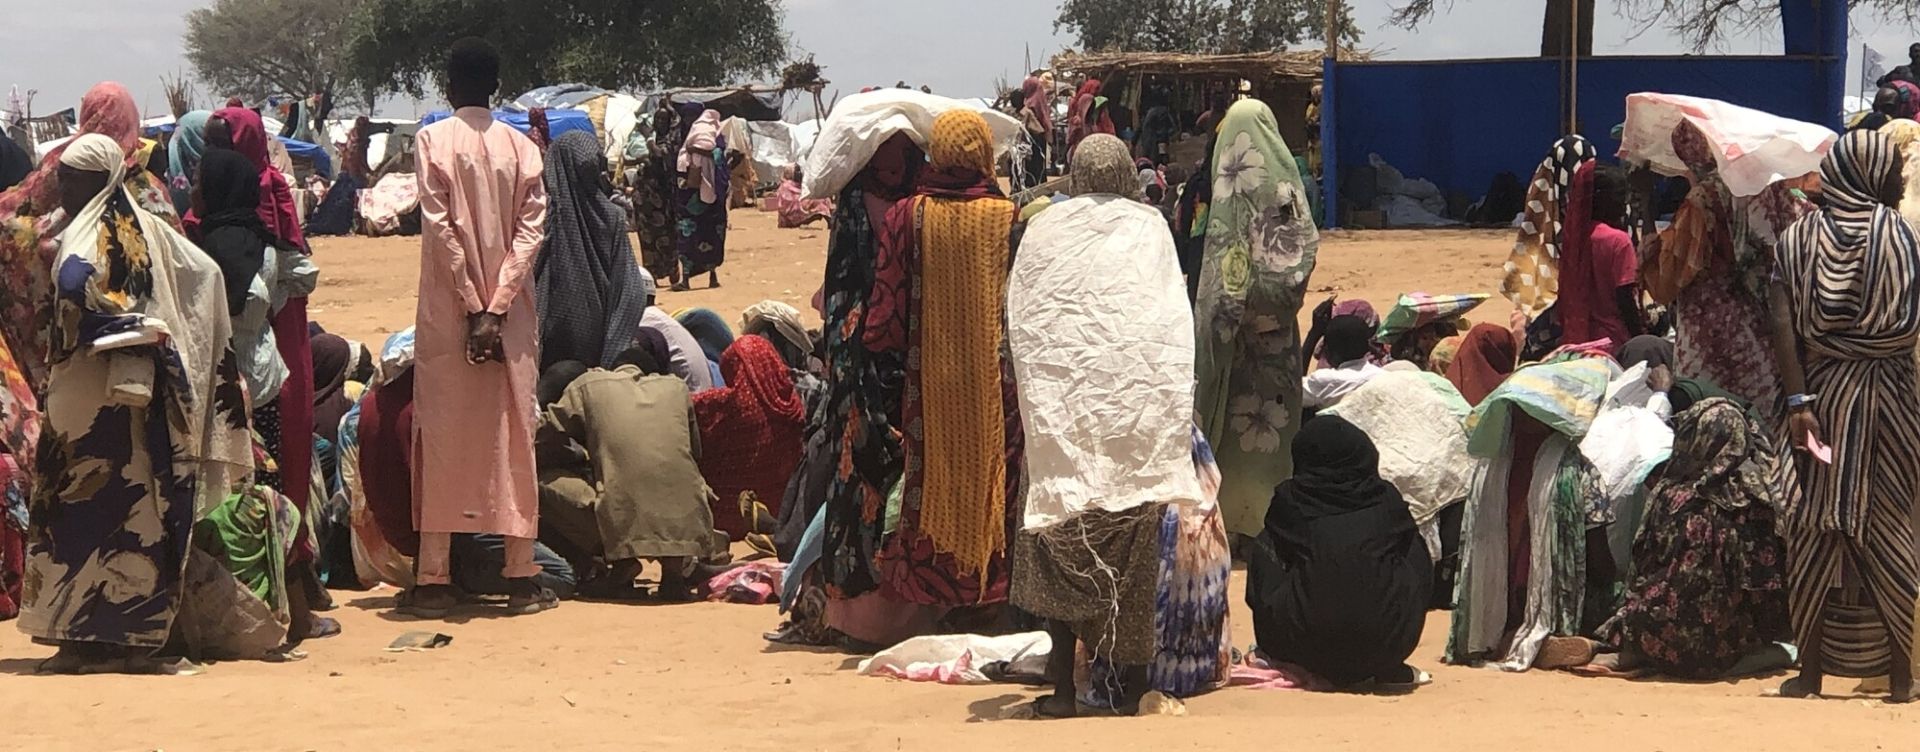 Sudanese refugees in Adré camp, waiting for a WFP food distribution